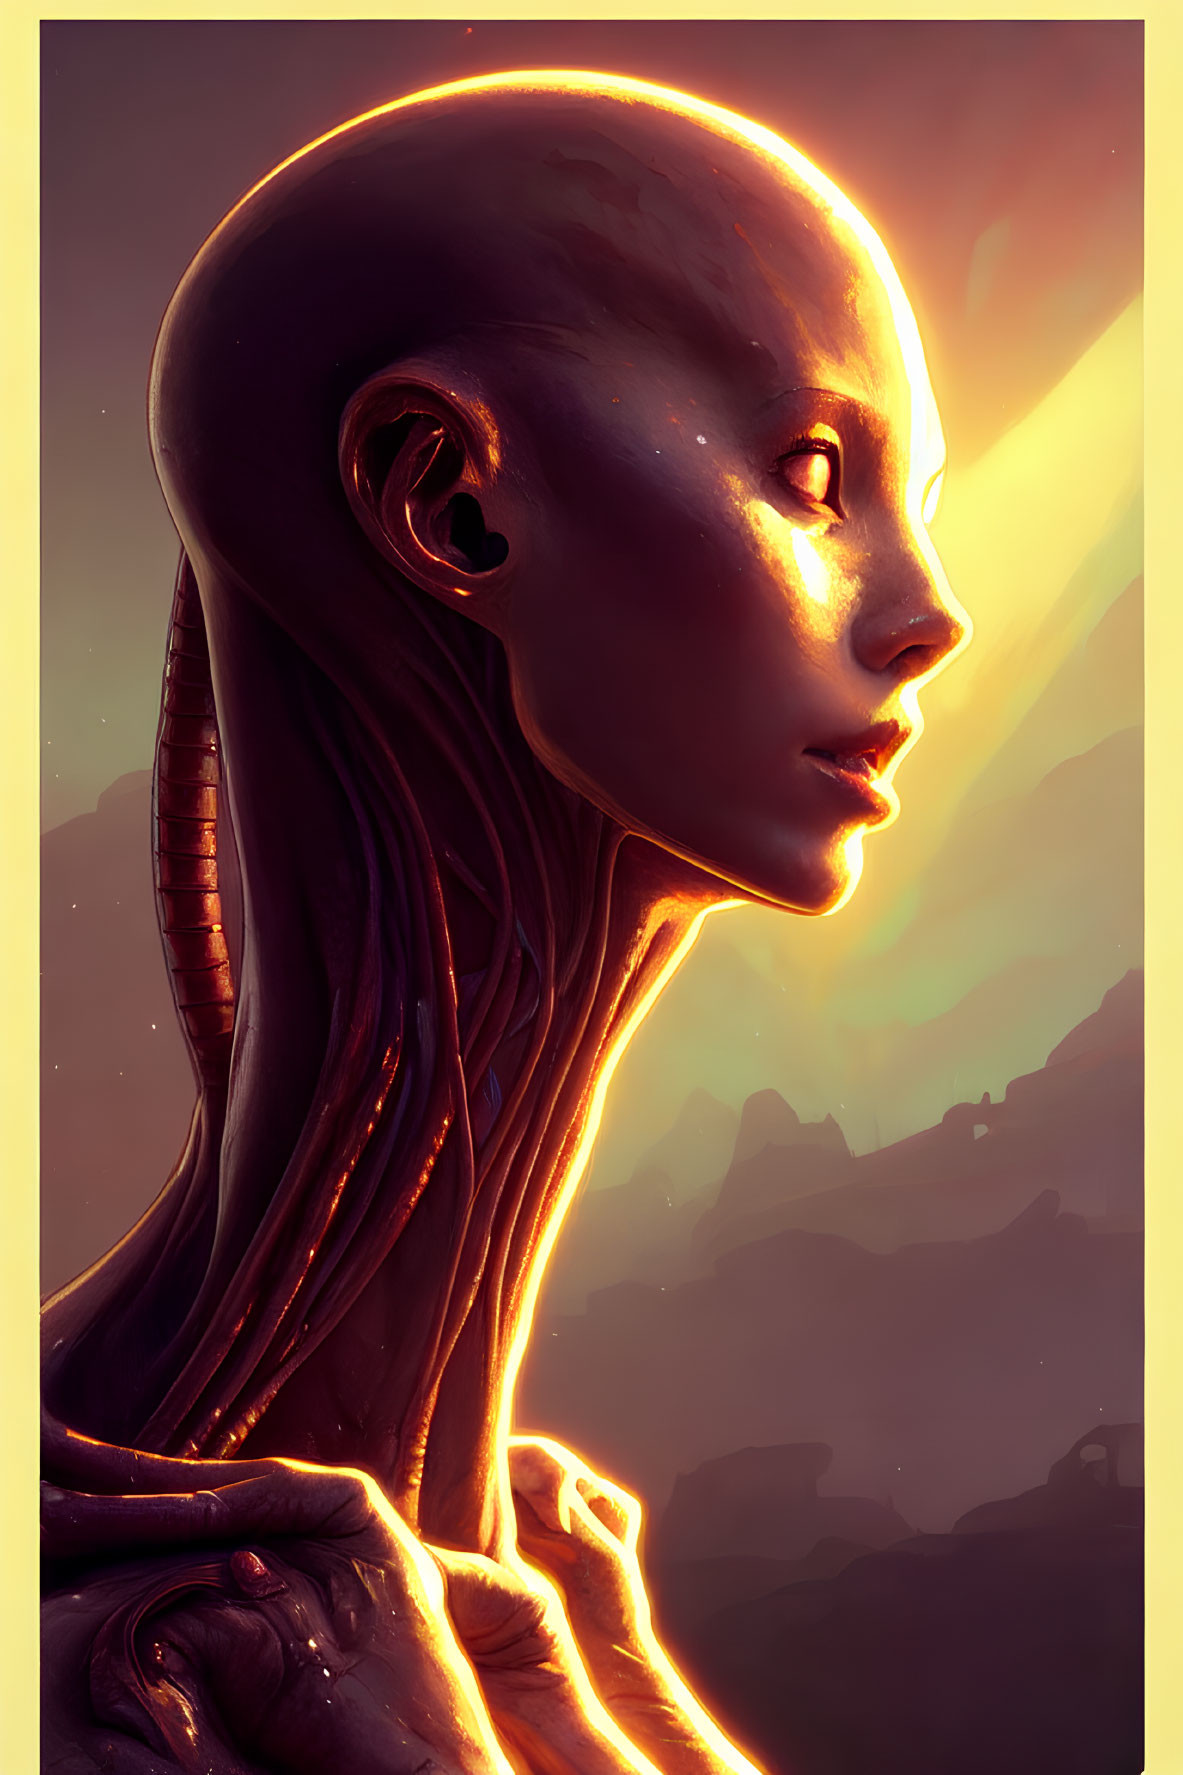 Elongated bald humanoid with glowing skin against mountainous sunset.